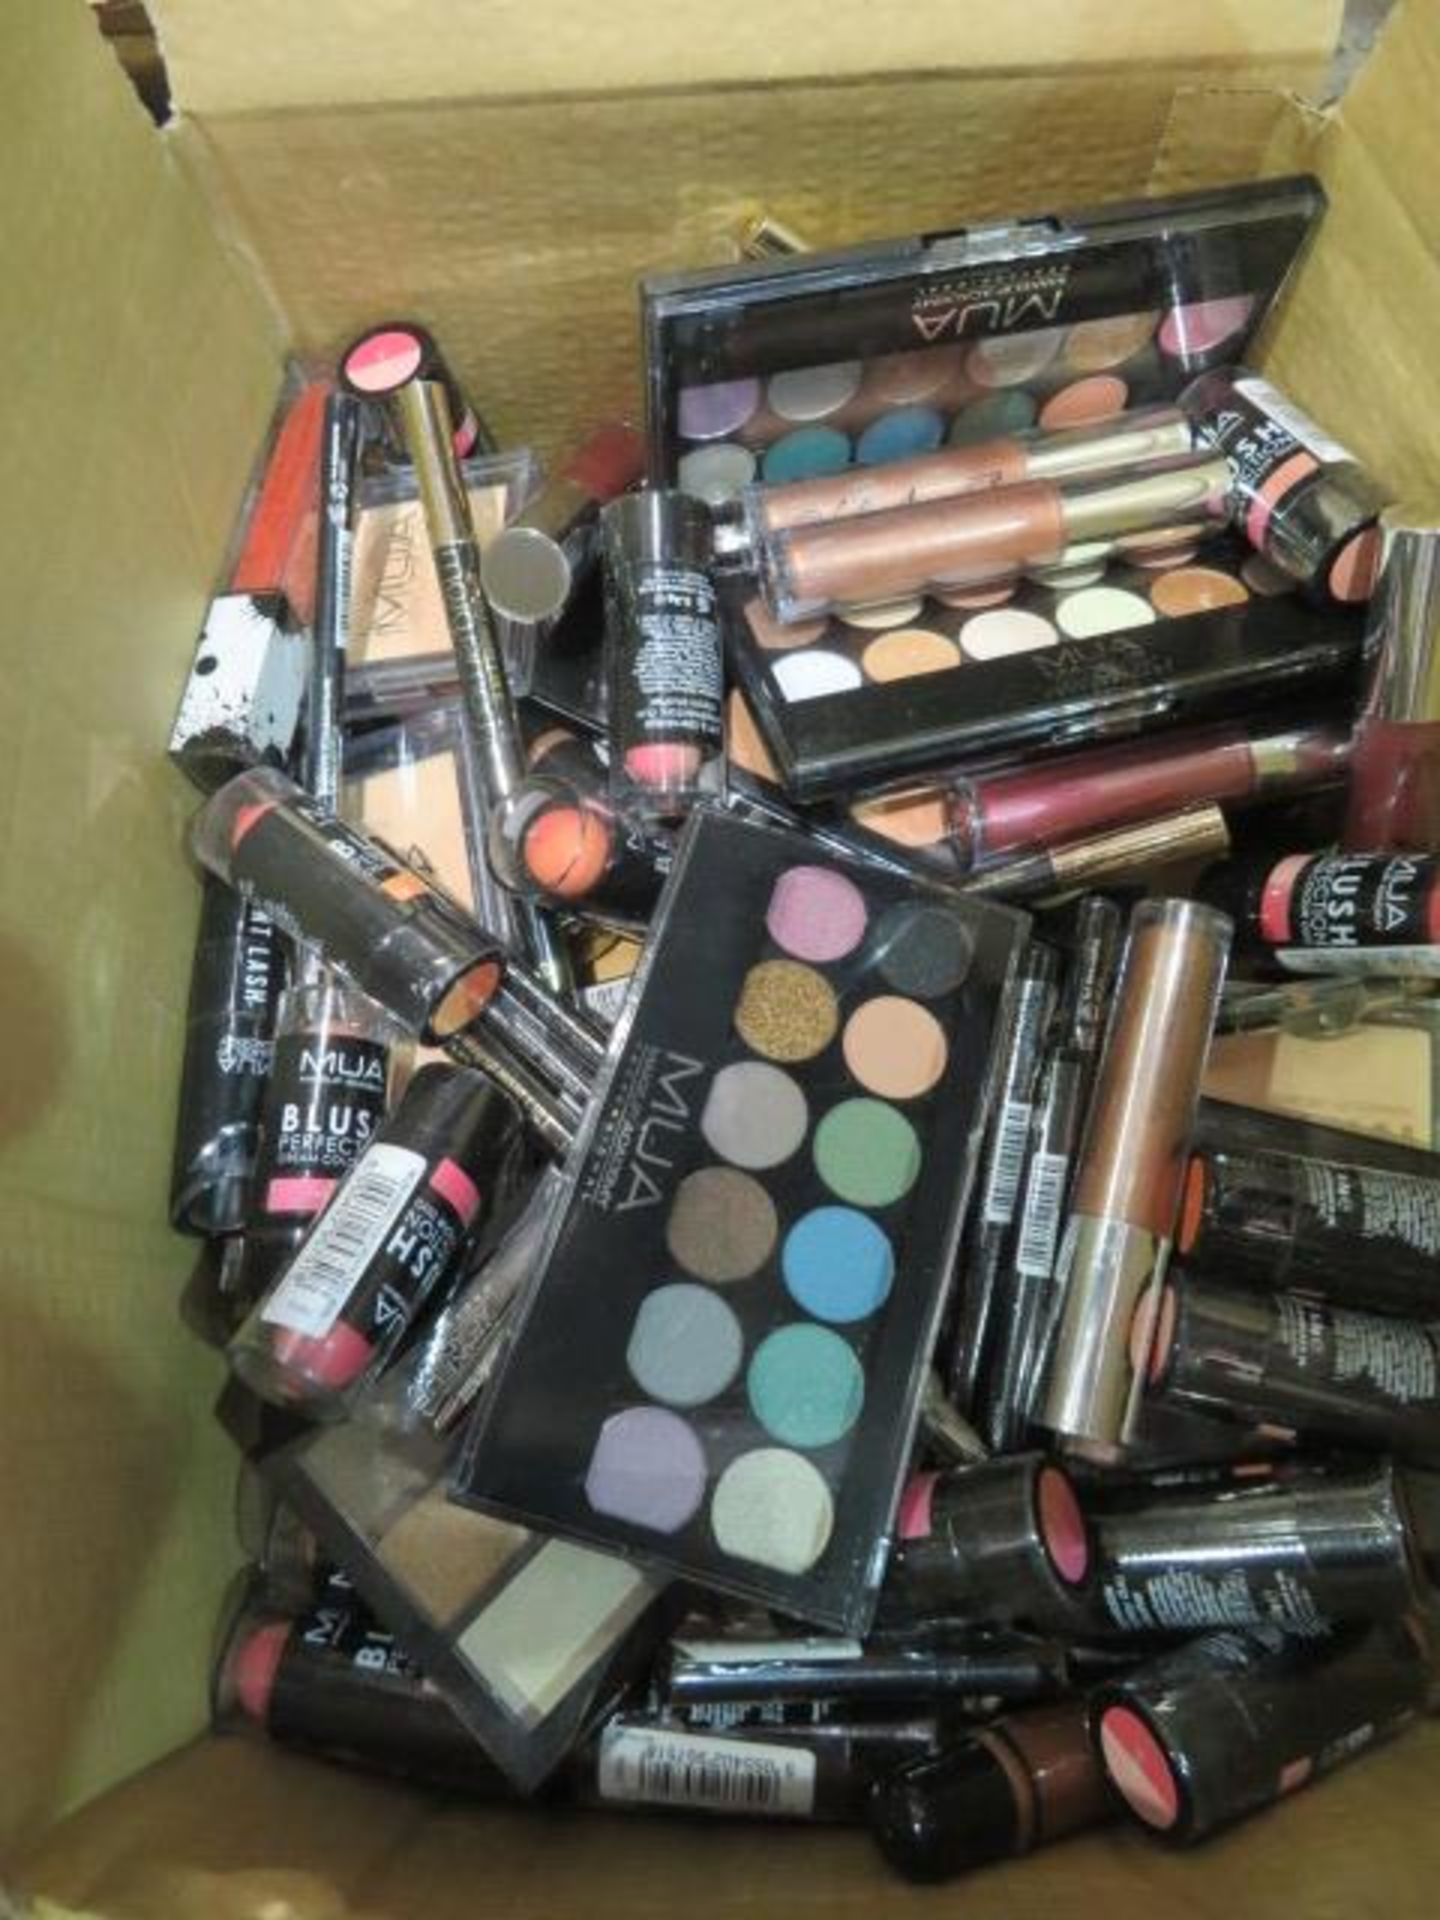 Circa. 200 items of various new make up acadamy make up to include: blush perfection, eyeshadow